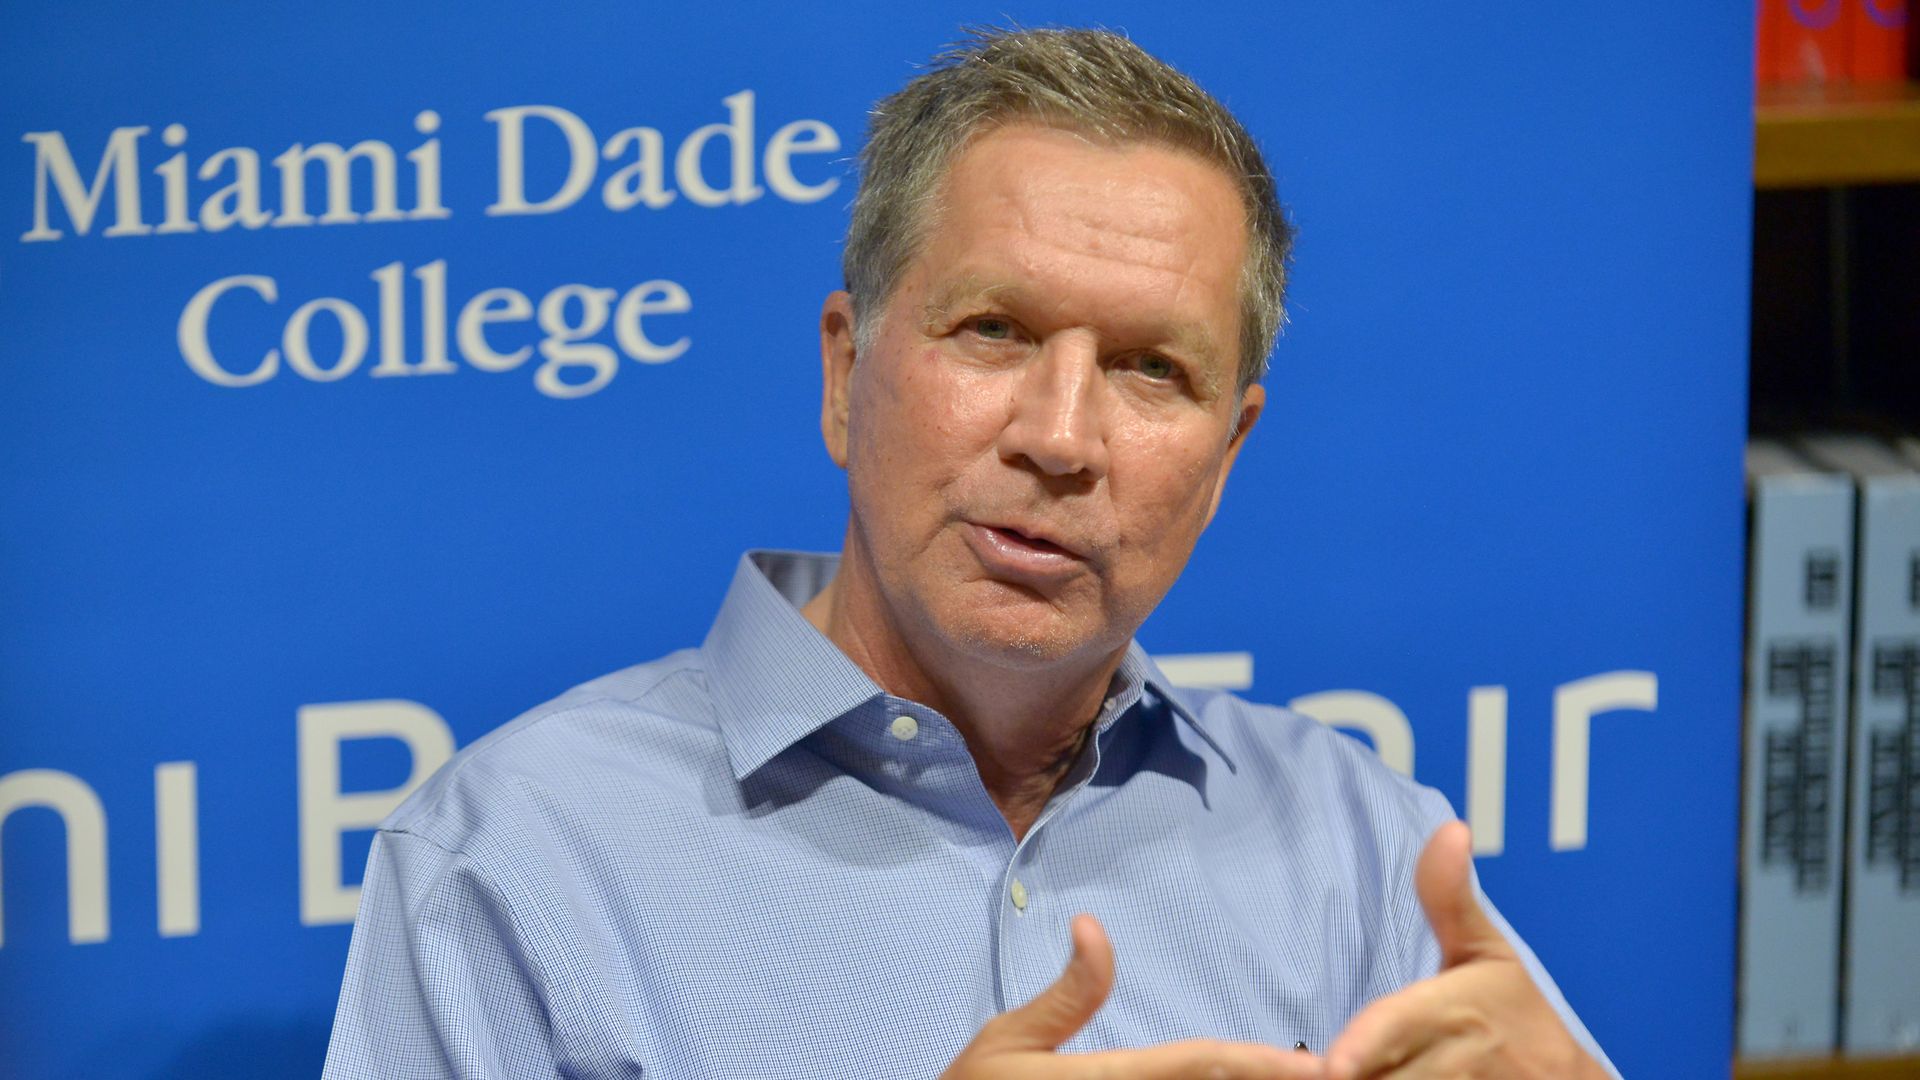 John Kasich speaks at a book signing